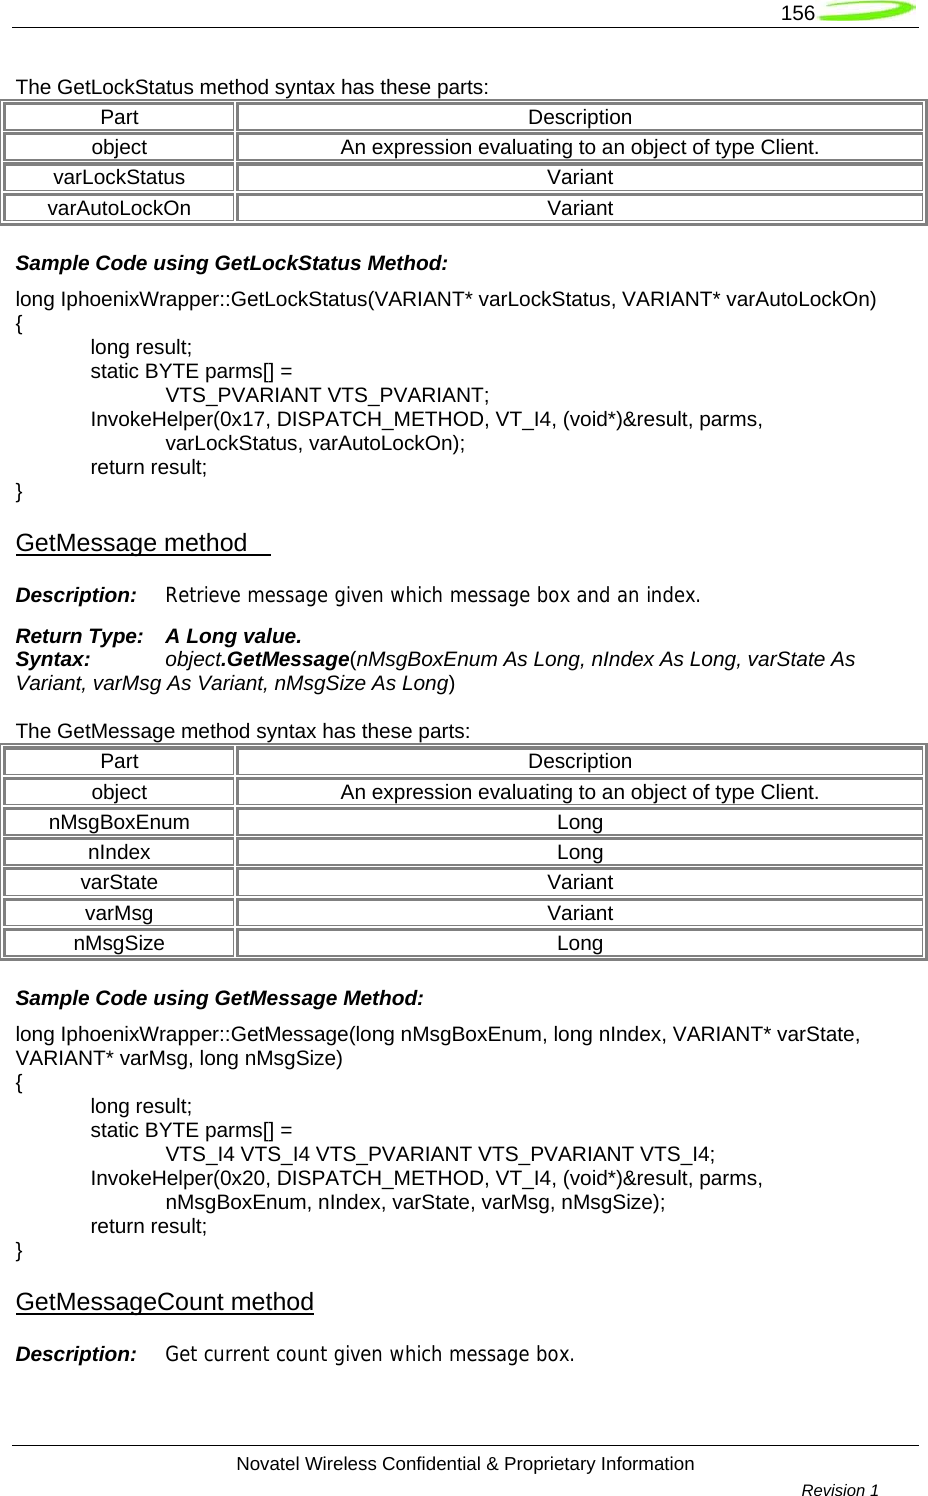   156  Novatel Wireless Confidential &amp; Proprietary Information        Revision 1   The GetLockStatus method syntax has these parts: Part Description object  An expression evaluating to an object of type Client. varLockStatus Variant varAutoLockOn Variant Sample Code using GetLockStatus Method: long IphoenixWrapper::GetLockStatus(VARIANT* varLockStatus, VARIANT* varAutoLockOn) {  long result;   static BYTE parms[] =   VTS_PVARIANT VTS_PVARIANT;  InvokeHelper(0x17, DISPATCH_METHOD, VT_I4, (void*)&amp;result, parms,   varLockStatus, varAutoLockOn);  return result; } GetMessage method     Description:  Retrieve message given which message box and an index. Return Type:  A Long value. Syntax:  object.GetMessage(nMsgBoxEnum As Long, nIndex As Long, varState As Variant, varMsg As Variant, nMsgSize As Long)  The GetMessage method syntax has these parts: Part Description object  An expression evaluating to an object of type Client. nMsgBoxEnum Long nIndex Long varState Variant varMsg Variant nMsgSize Long Sample Code using GetMessage Method: long IphoenixWrapper::GetMessage(long nMsgBoxEnum, long nIndex, VARIANT* varState, VARIANT* varMsg, long nMsgSize) {  long result;   static BYTE parms[] =   VTS_I4 VTS_I4 VTS_PVARIANT VTS_PVARIANT VTS_I4;  InvokeHelper(0x20, DISPATCH_METHOD, VT_I4, (void*)&amp;result, parms,     nMsgBoxEnum, nIndex, varState, varMsg, nMsgSize);  return result; } GetMessageCount method Description:  Get current count given which message box. 